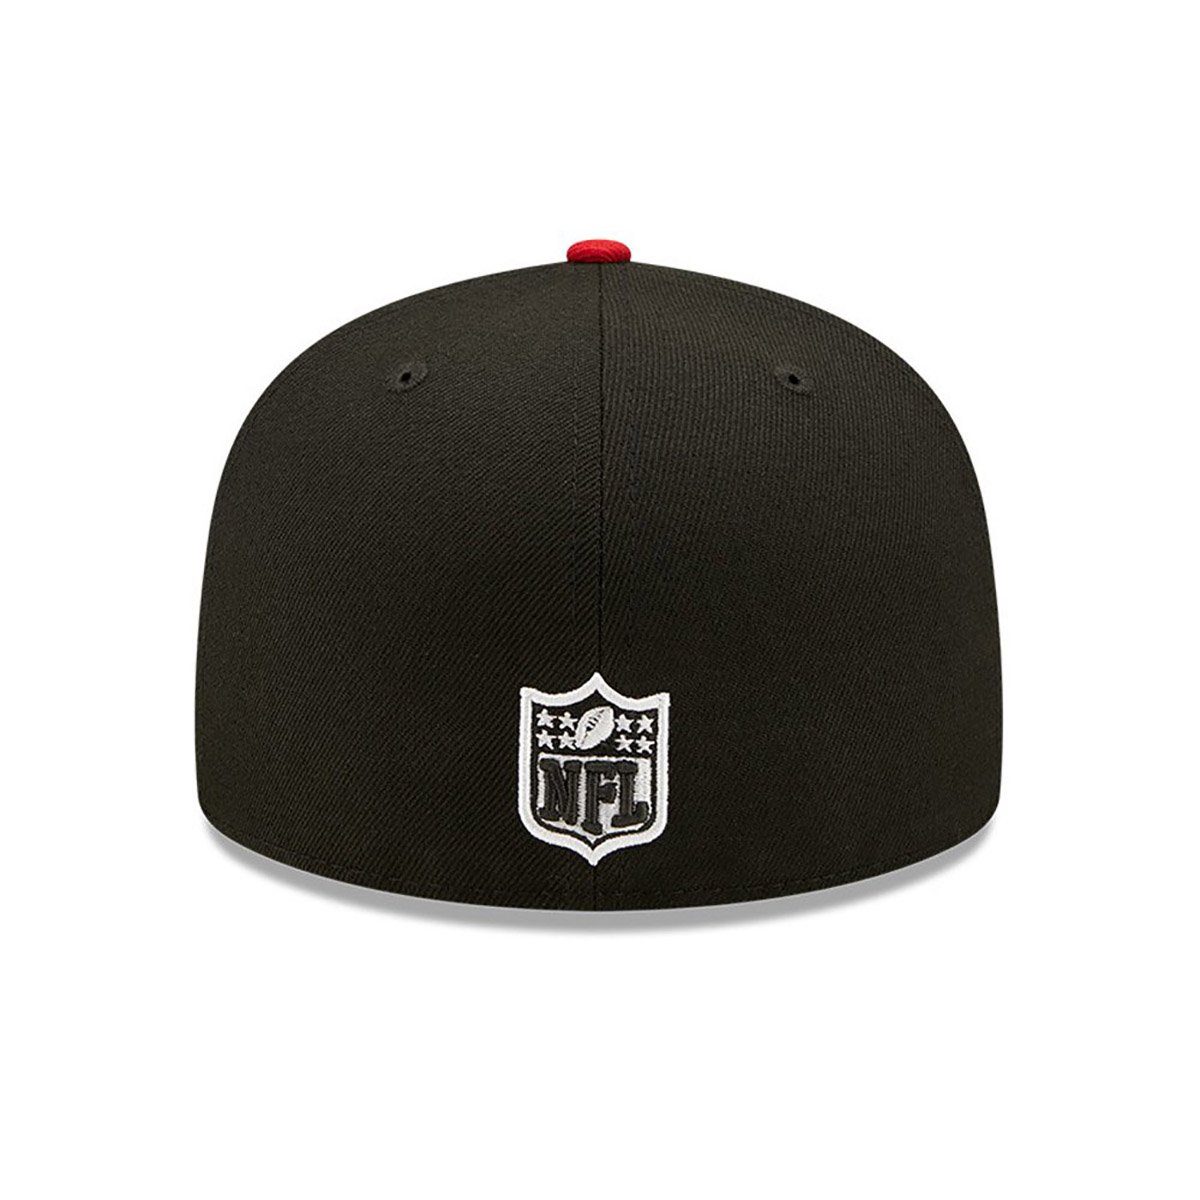 Fitted 59FIFTY New Side Era Patch Buccaneers Cap Tampa Buy